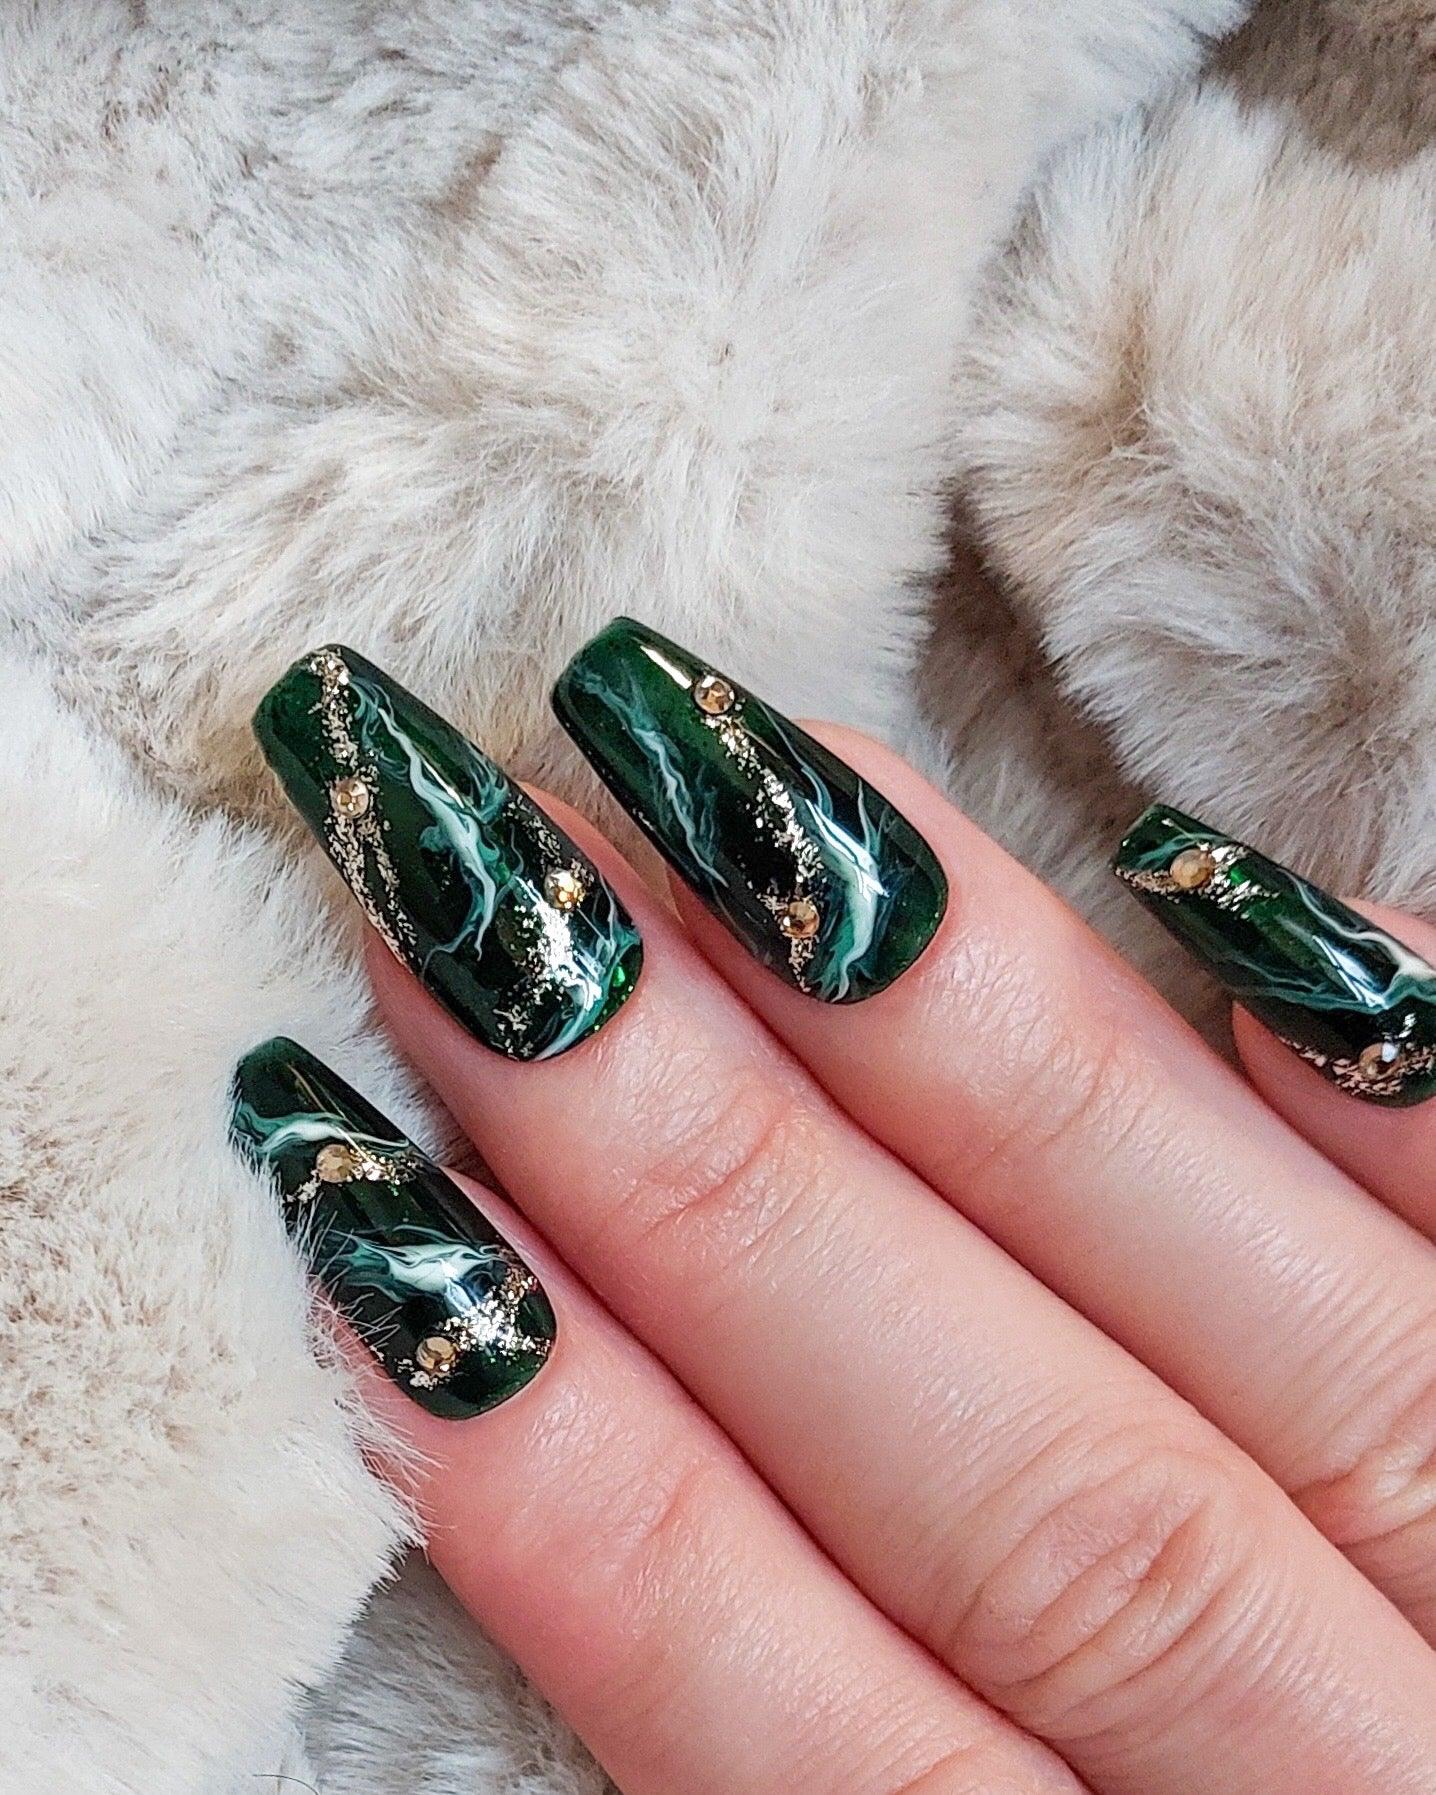 Green Marble Queen | Deep Emerald Green Press ons with Marble Designs and Glitter - FancyB Press-on Nails